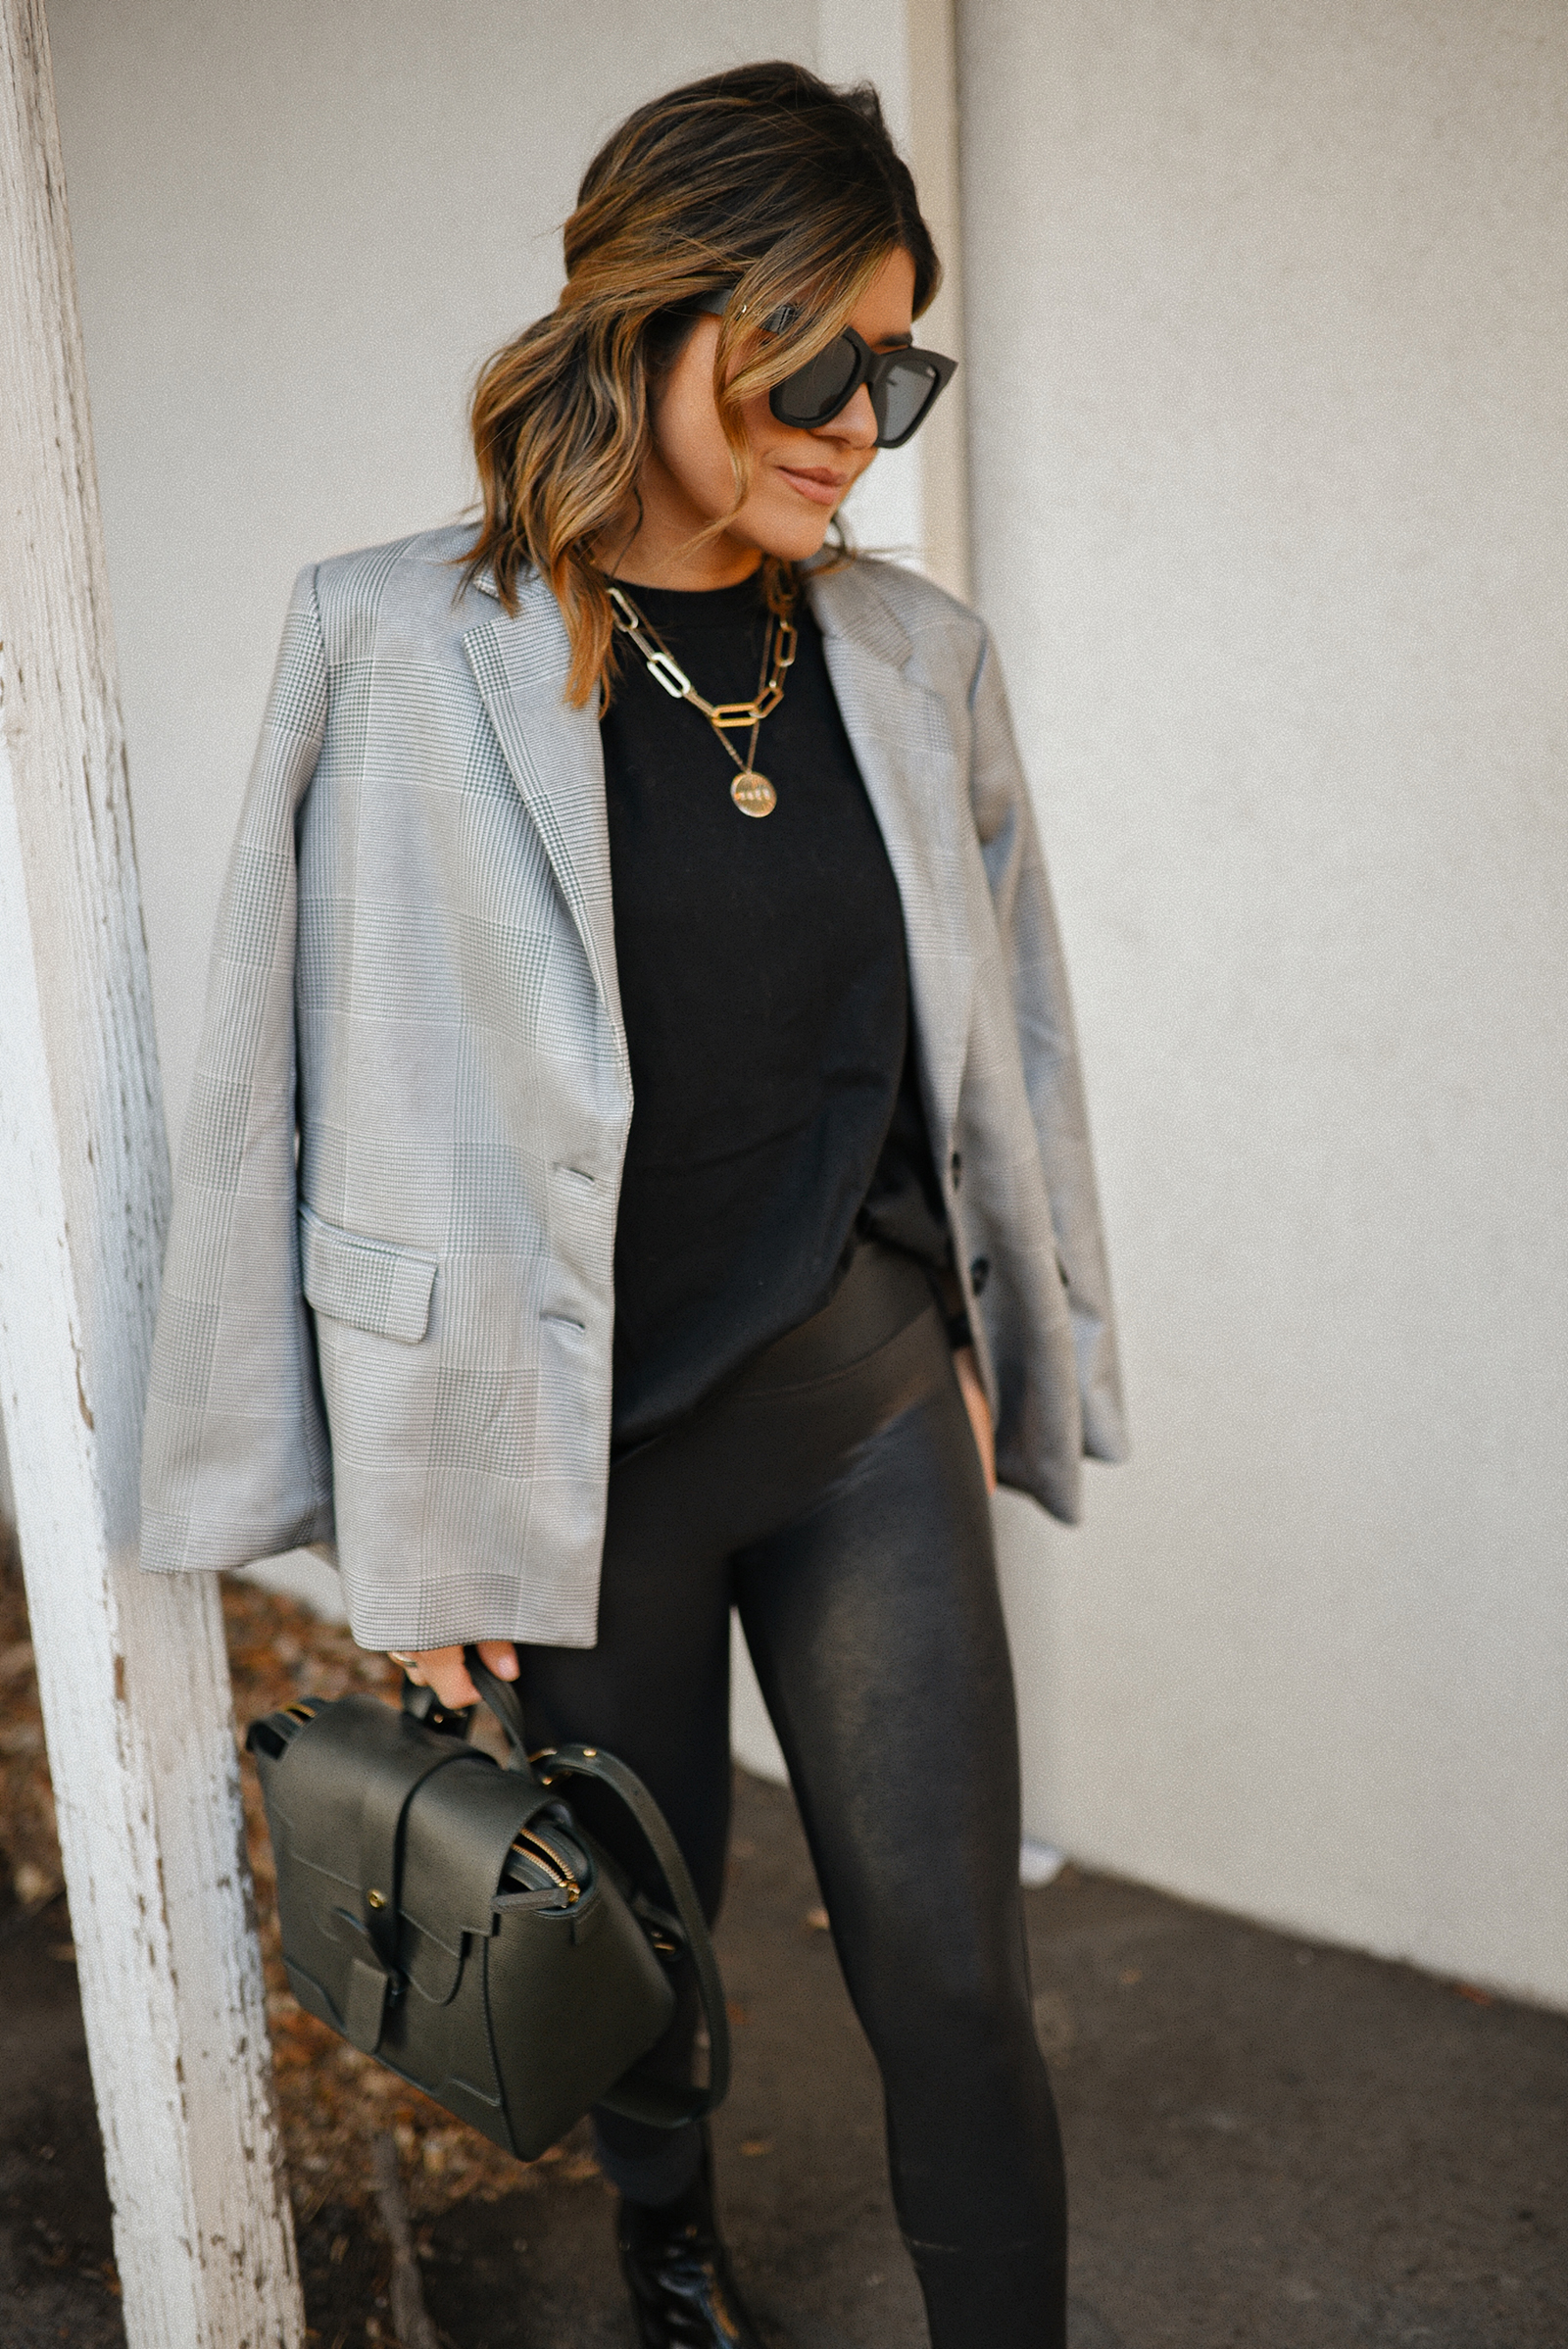 A COMFY AND CHIC LOOK WITH FAUX LEATHER LEGGINGS